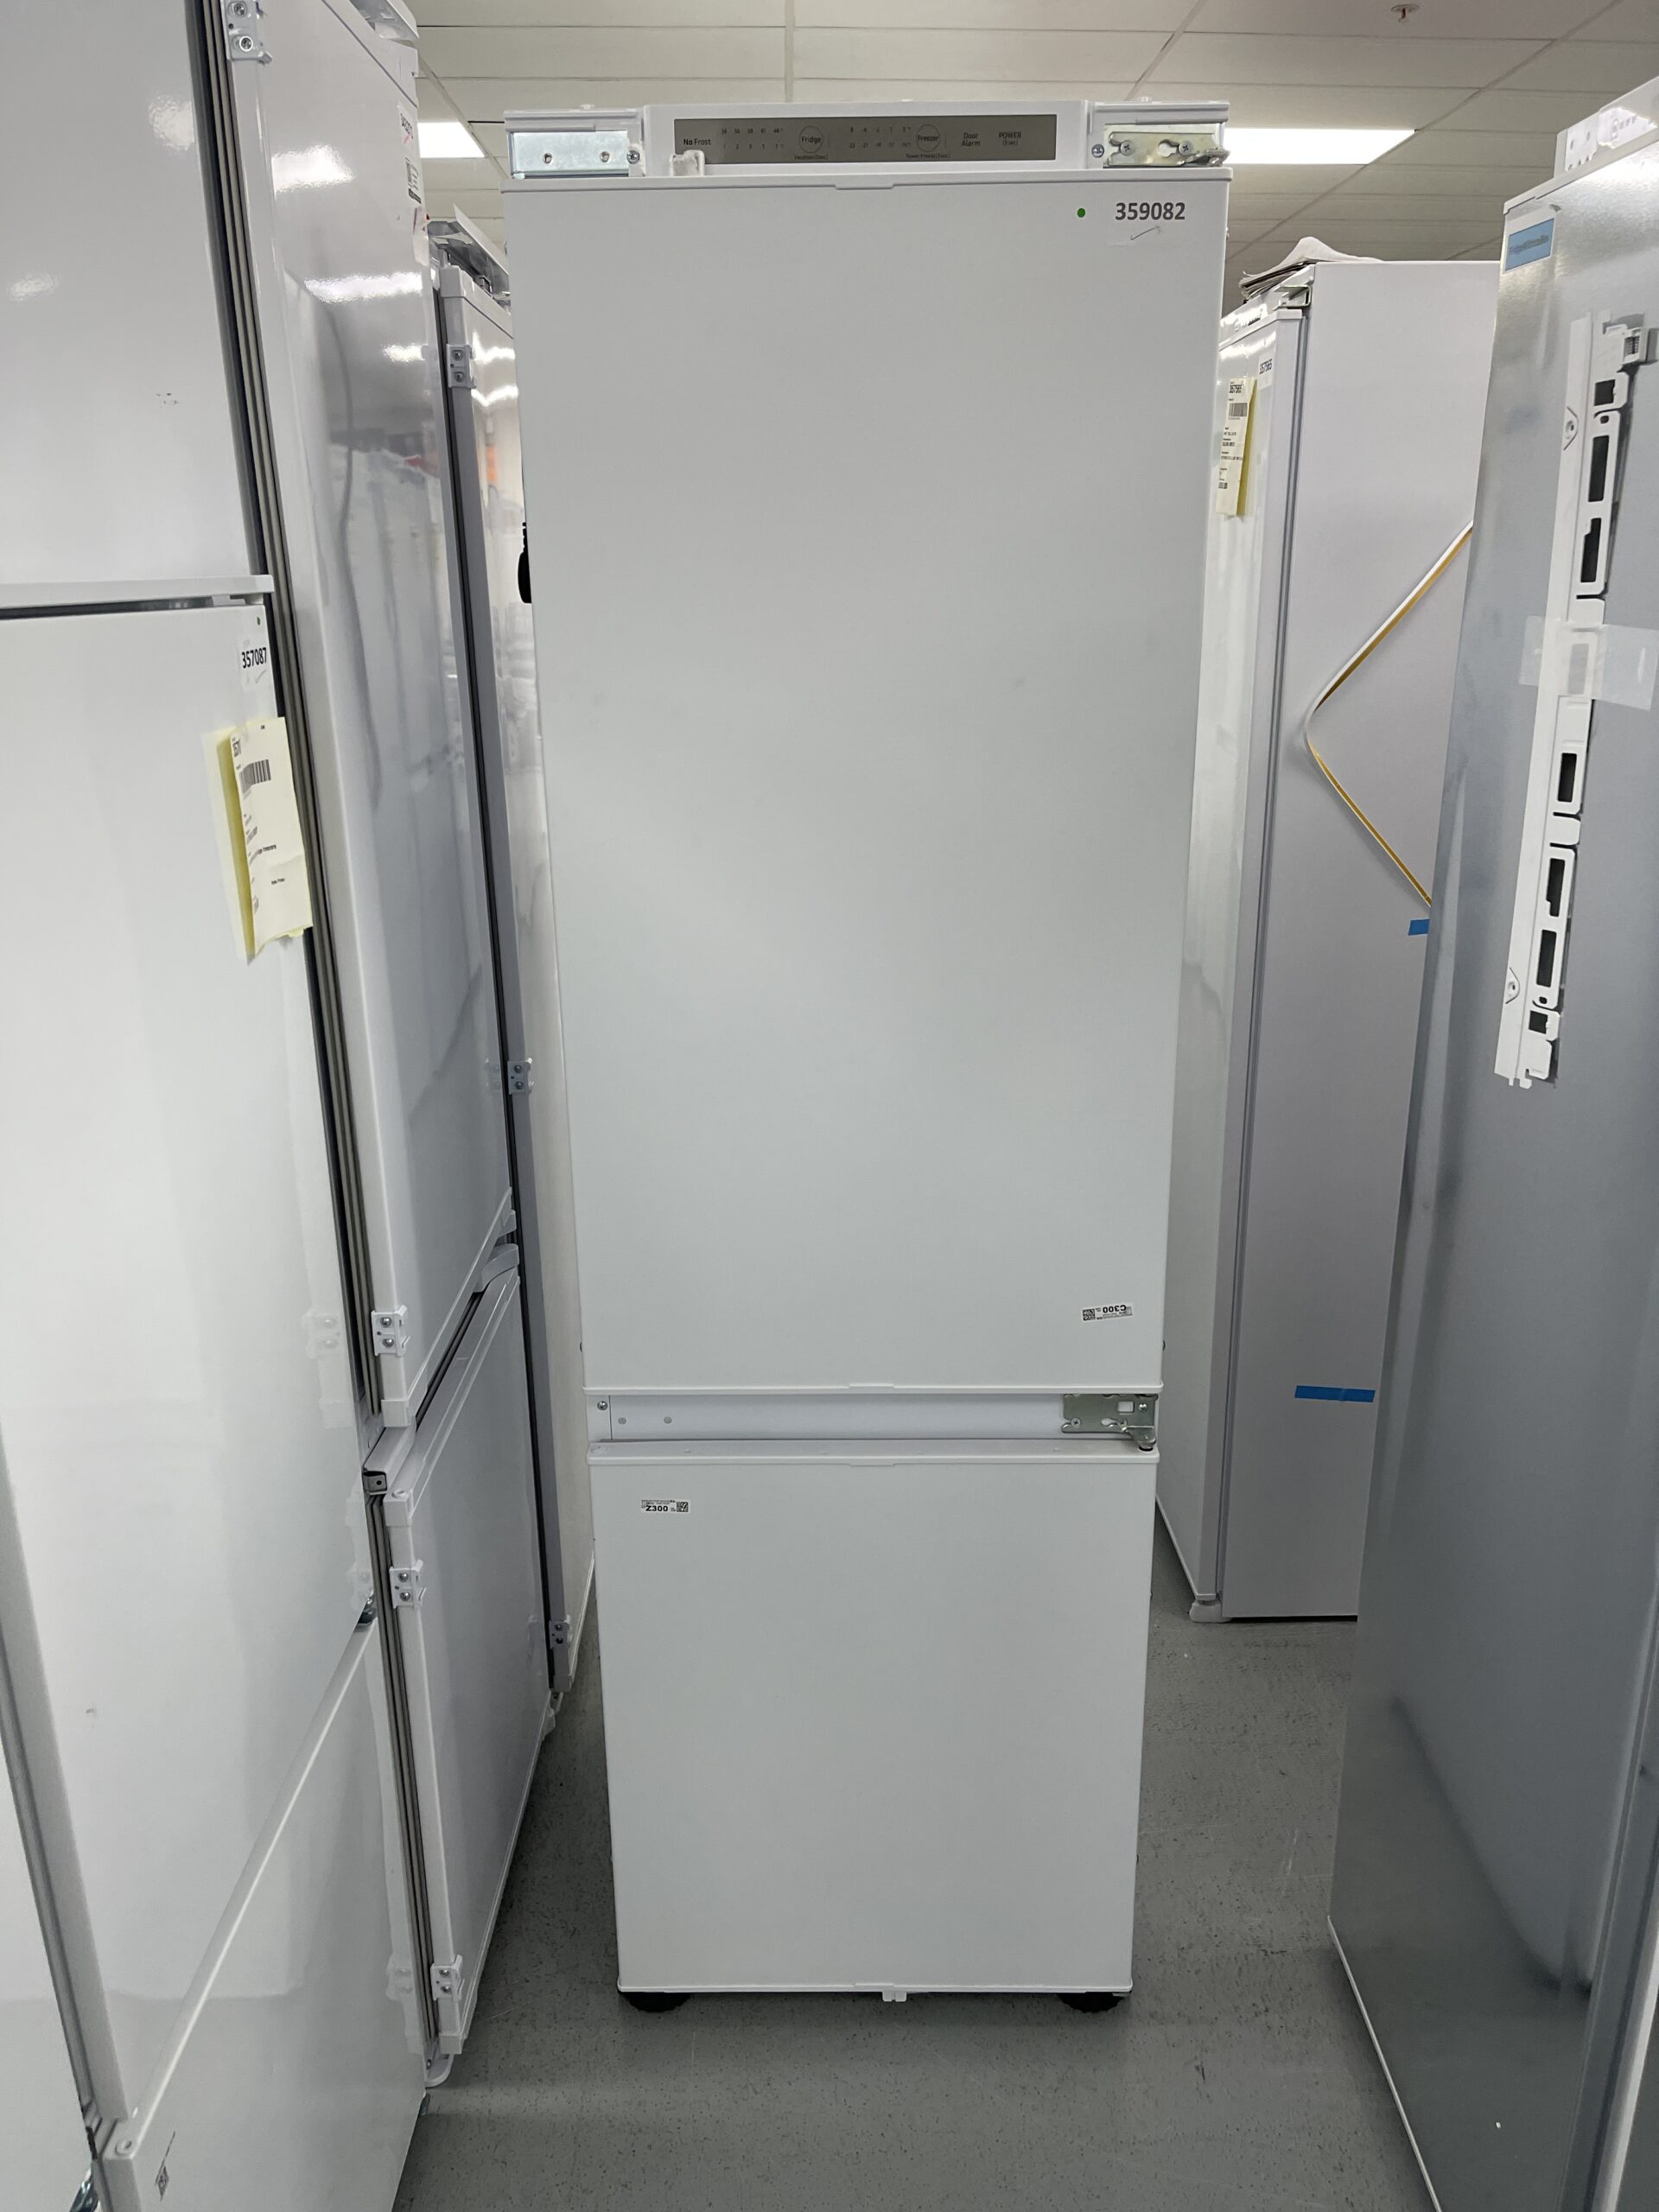 Samsung Series 5 BRB26600FWW Integrated 70/30 Total No Frost Fridge Freezer with Sliding Door 